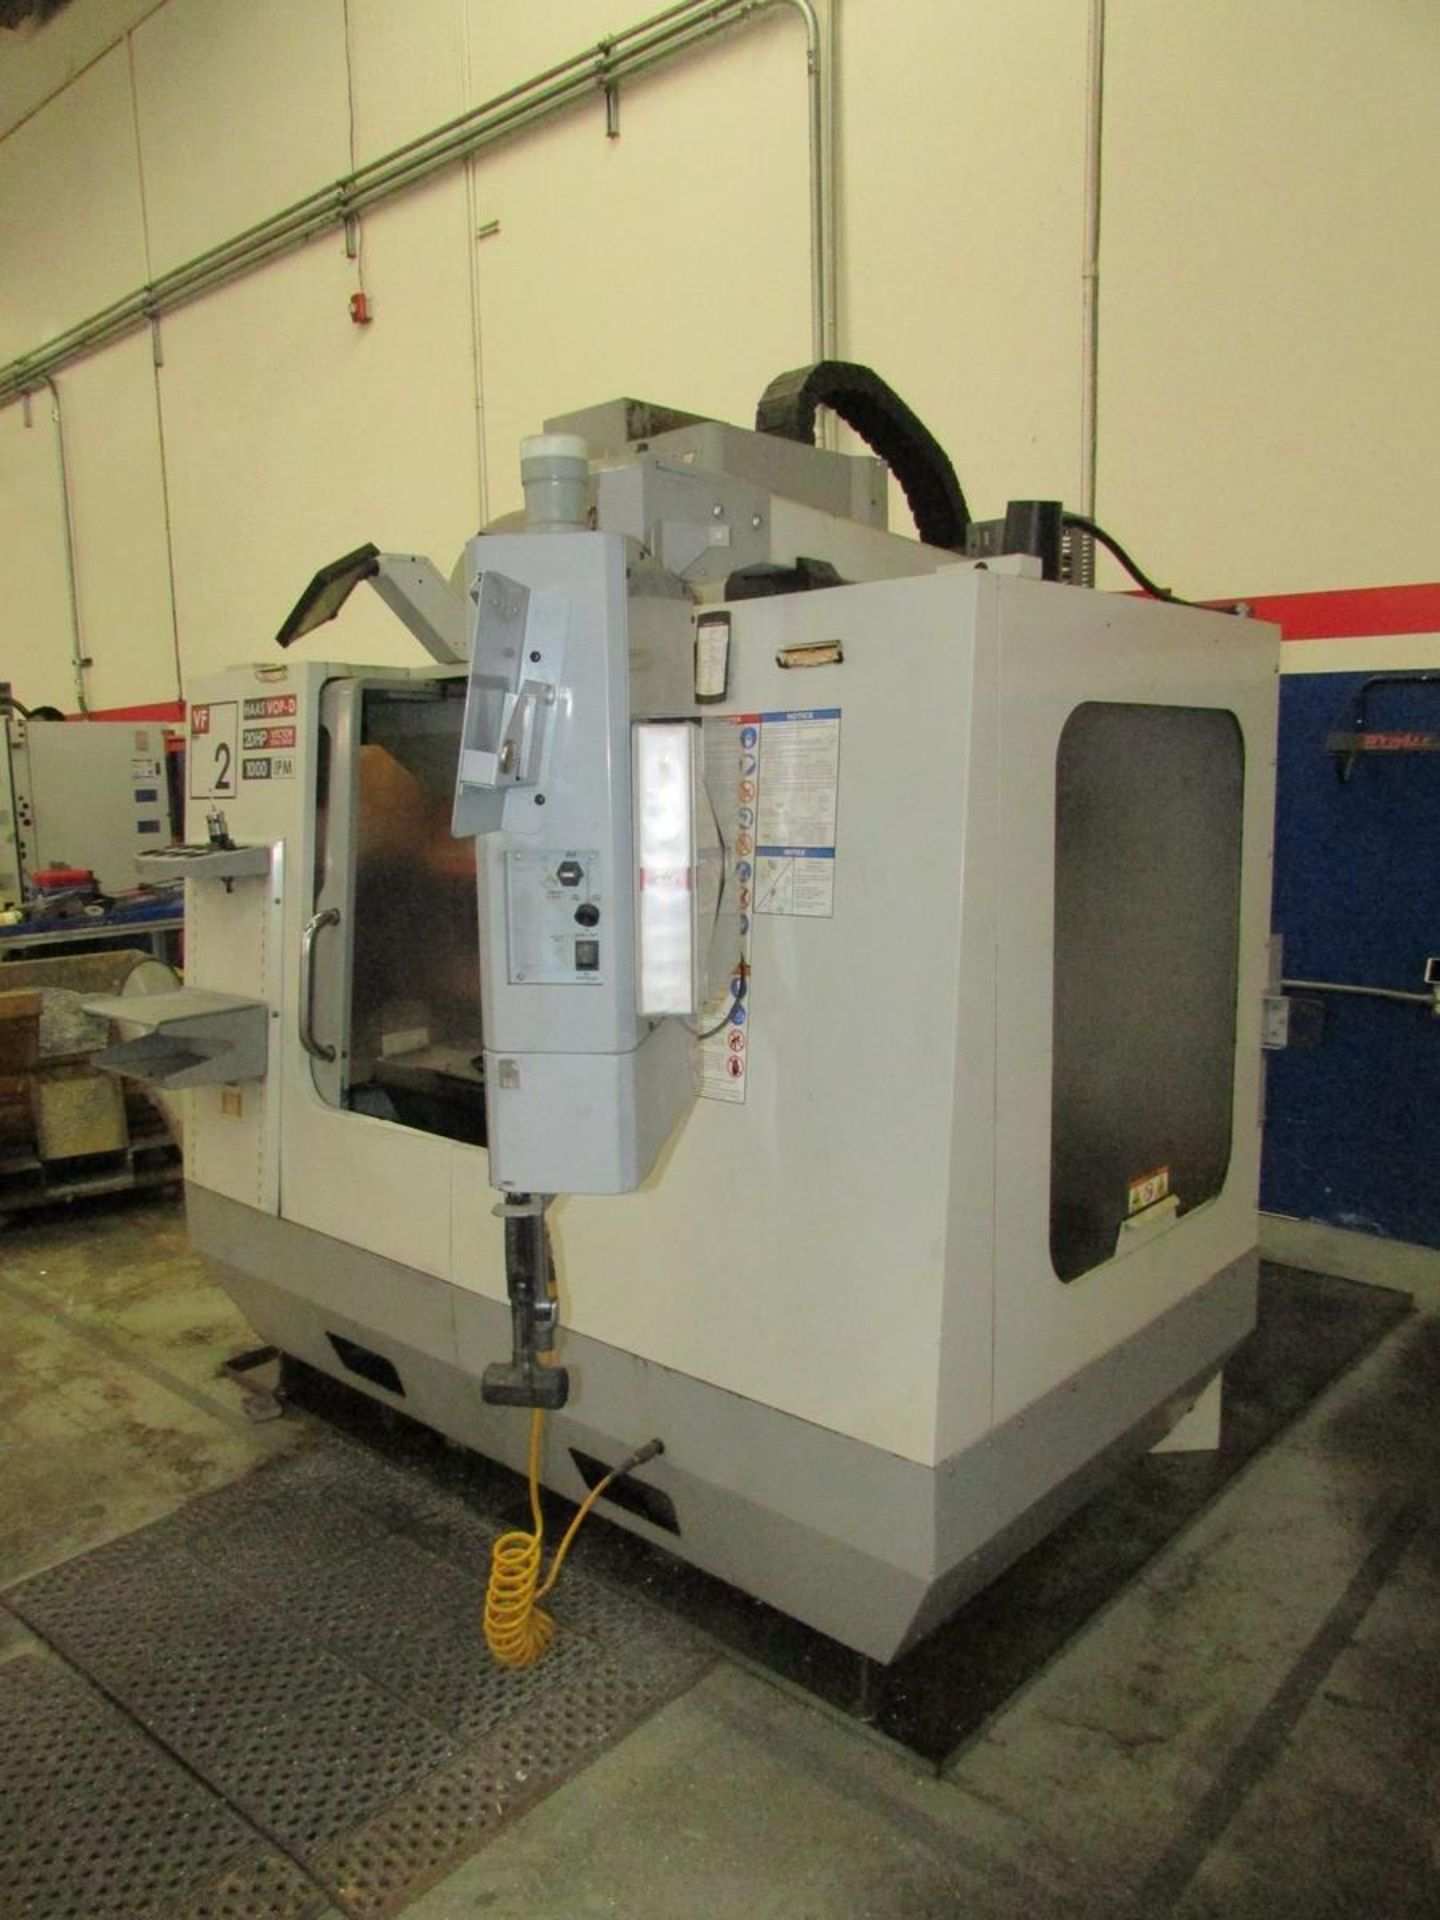 Haas VF2D Vertical CNC Machining Center (2007) - Image 29 of 48